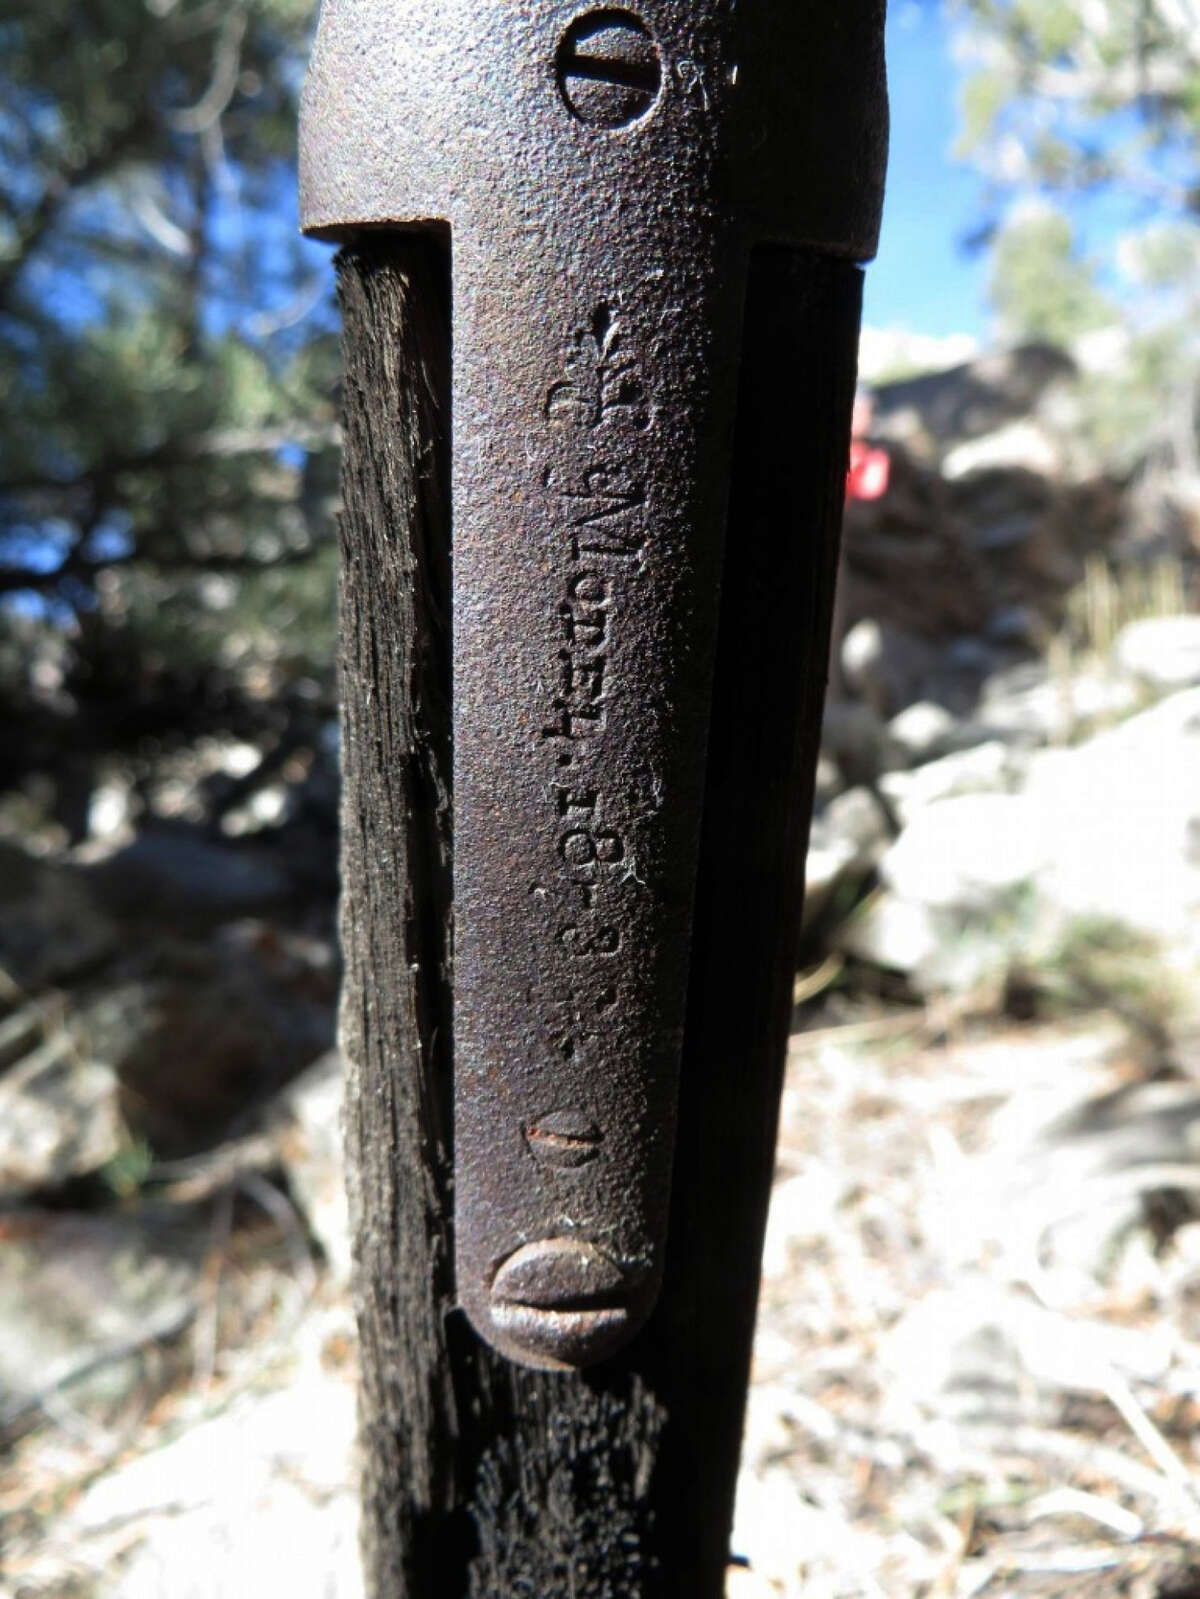 This is the rifle that was discovered propped against a juniper tree in Great Basin National Park.